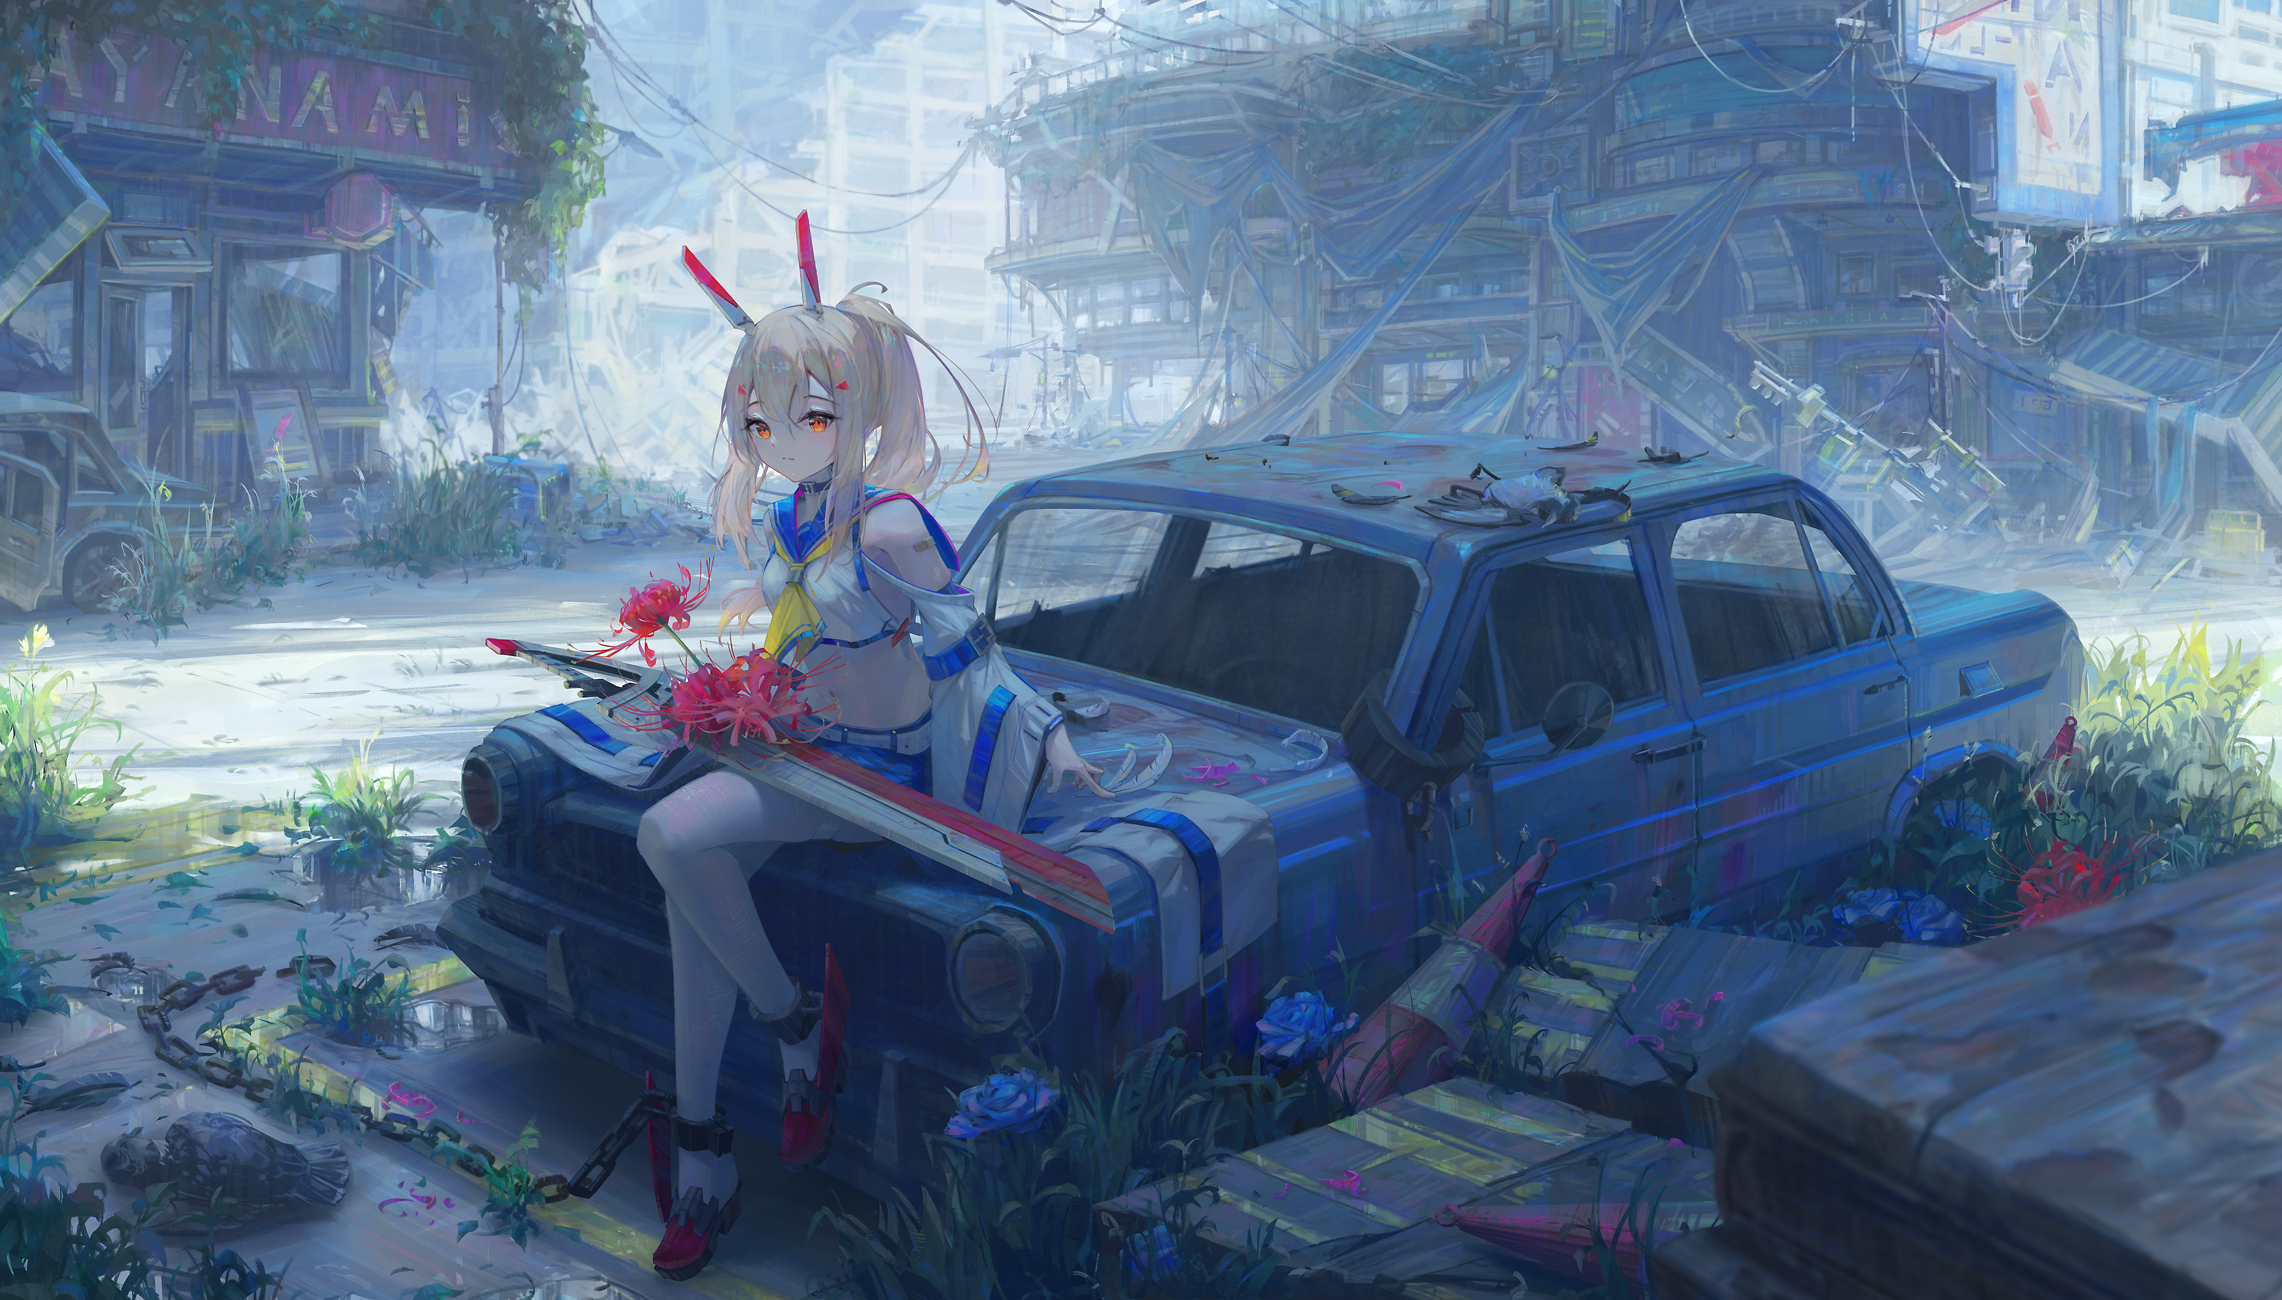 Anime 2282x1300 Azur Lane Ayanami (Azur Lane) anime girls sitting car flowers chains looking at viewer ponytail traffic cone messy Destroyed city ruins ruins